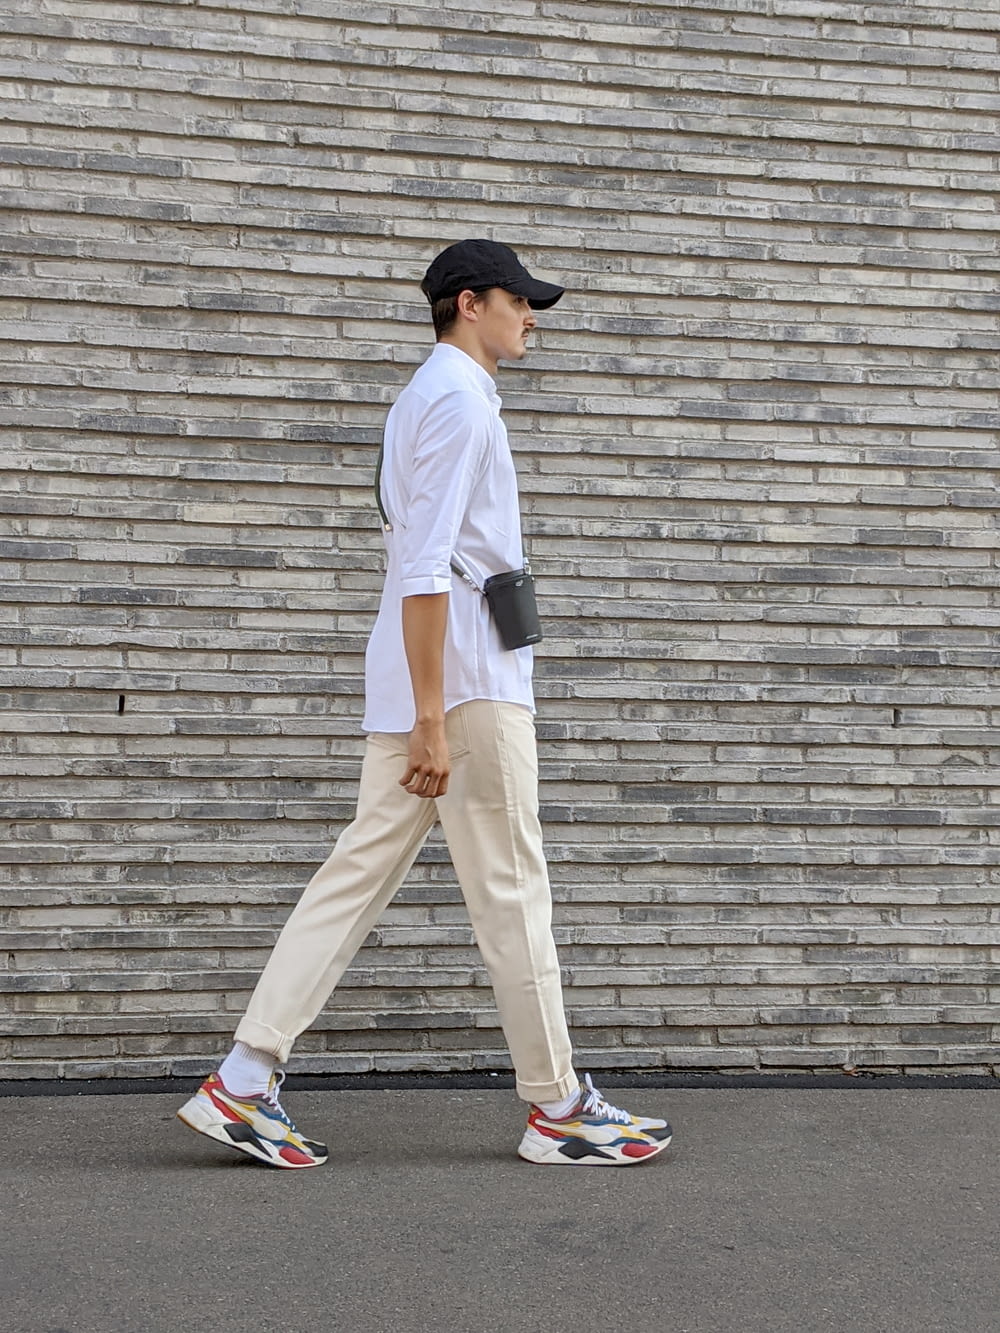 man in white t-shirt and beige pants standing on gray concrete floor